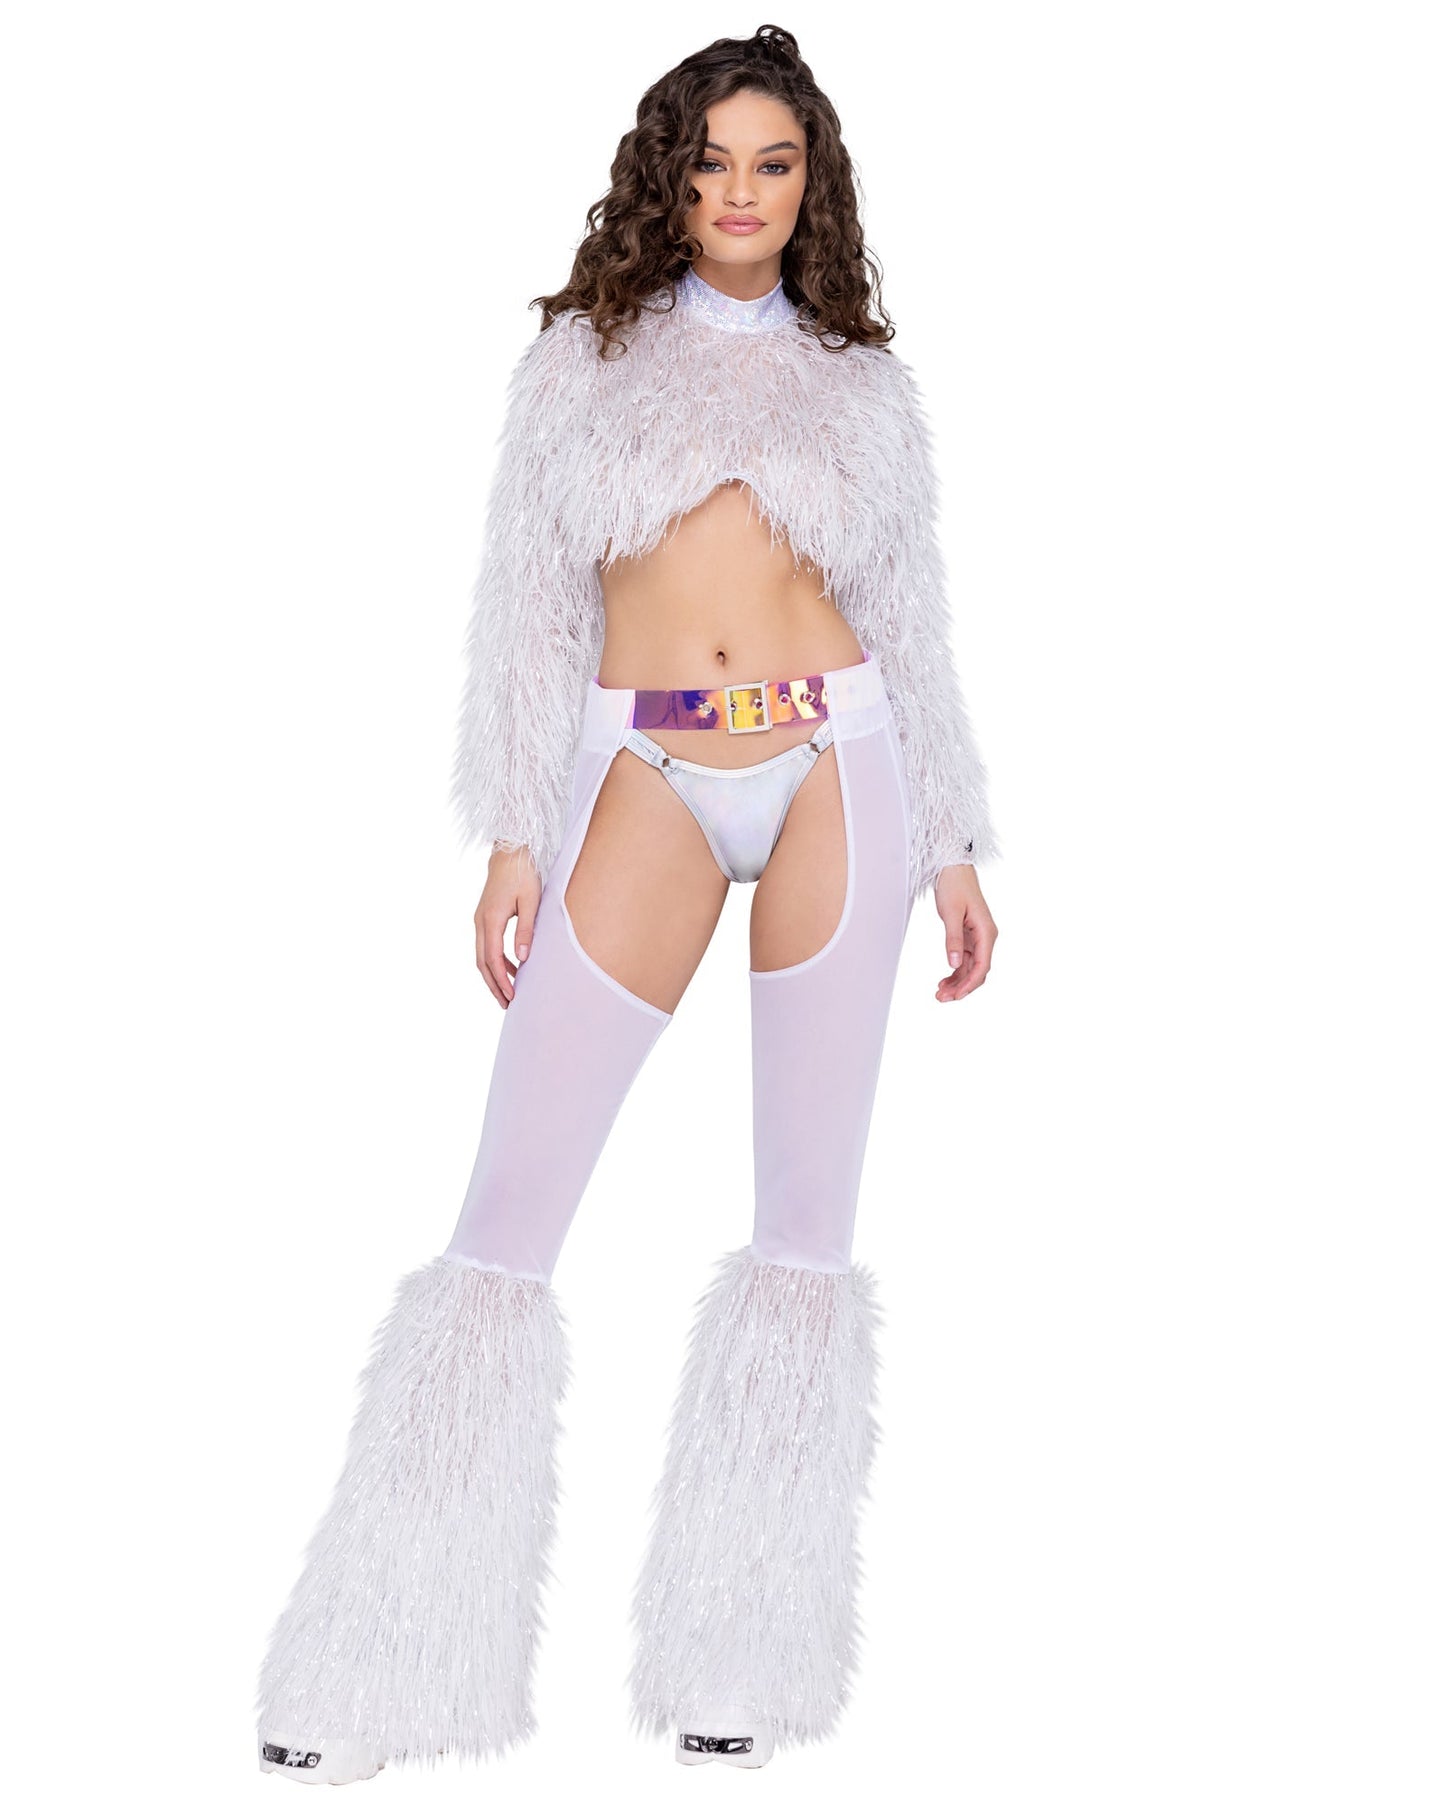 6250 - Long Sleeved Faux Fur Cropped Top Eye Candy Sensation